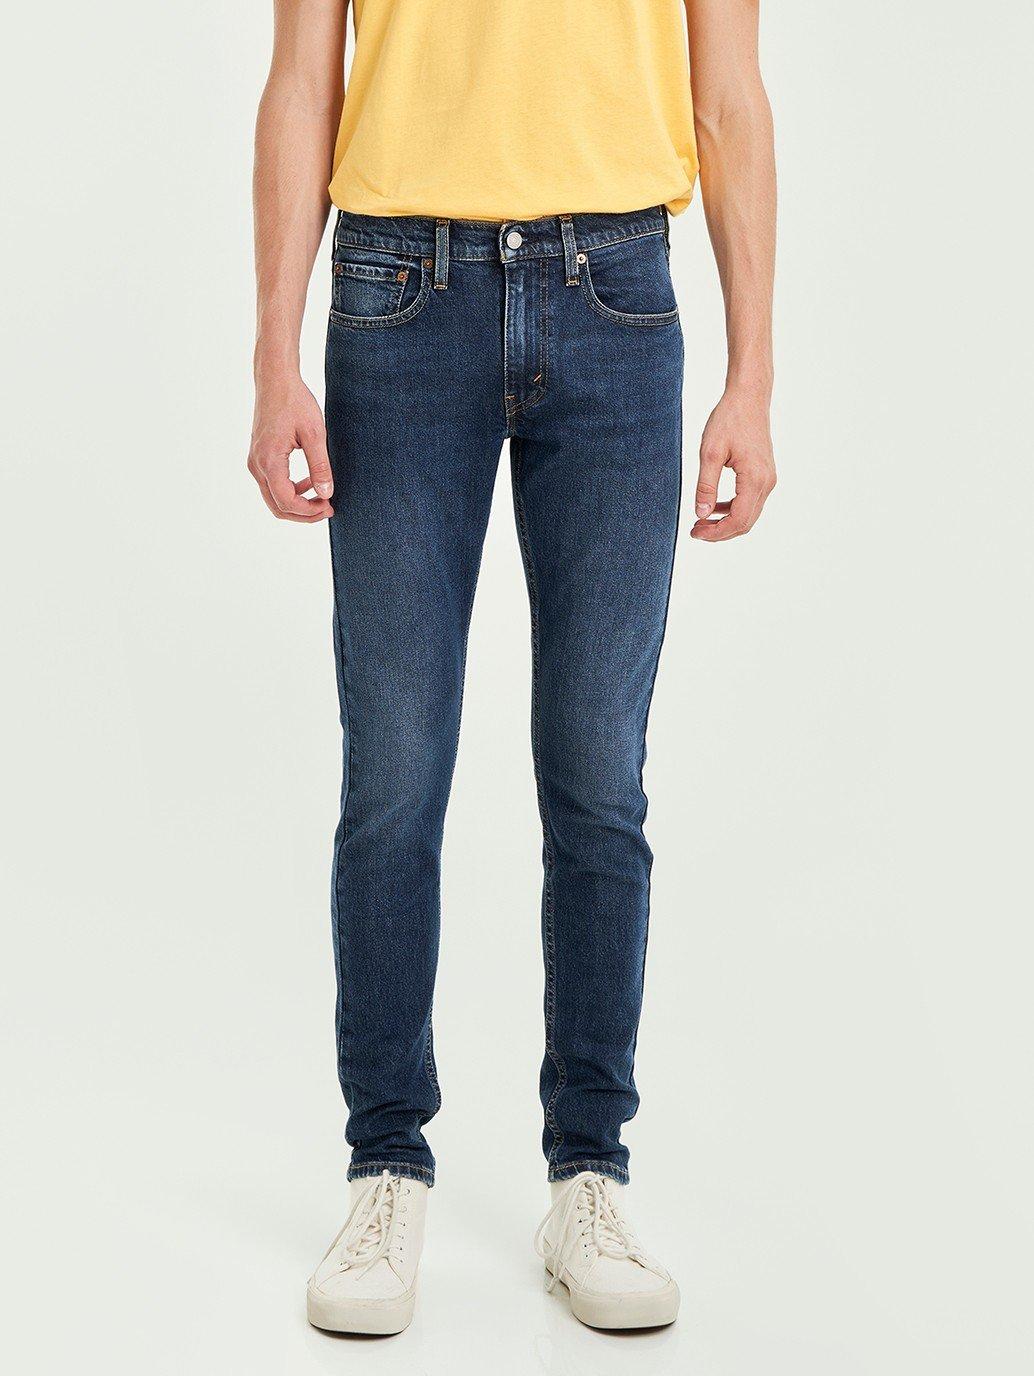 Top 71+ imagen levi’s skinny tapered jeans